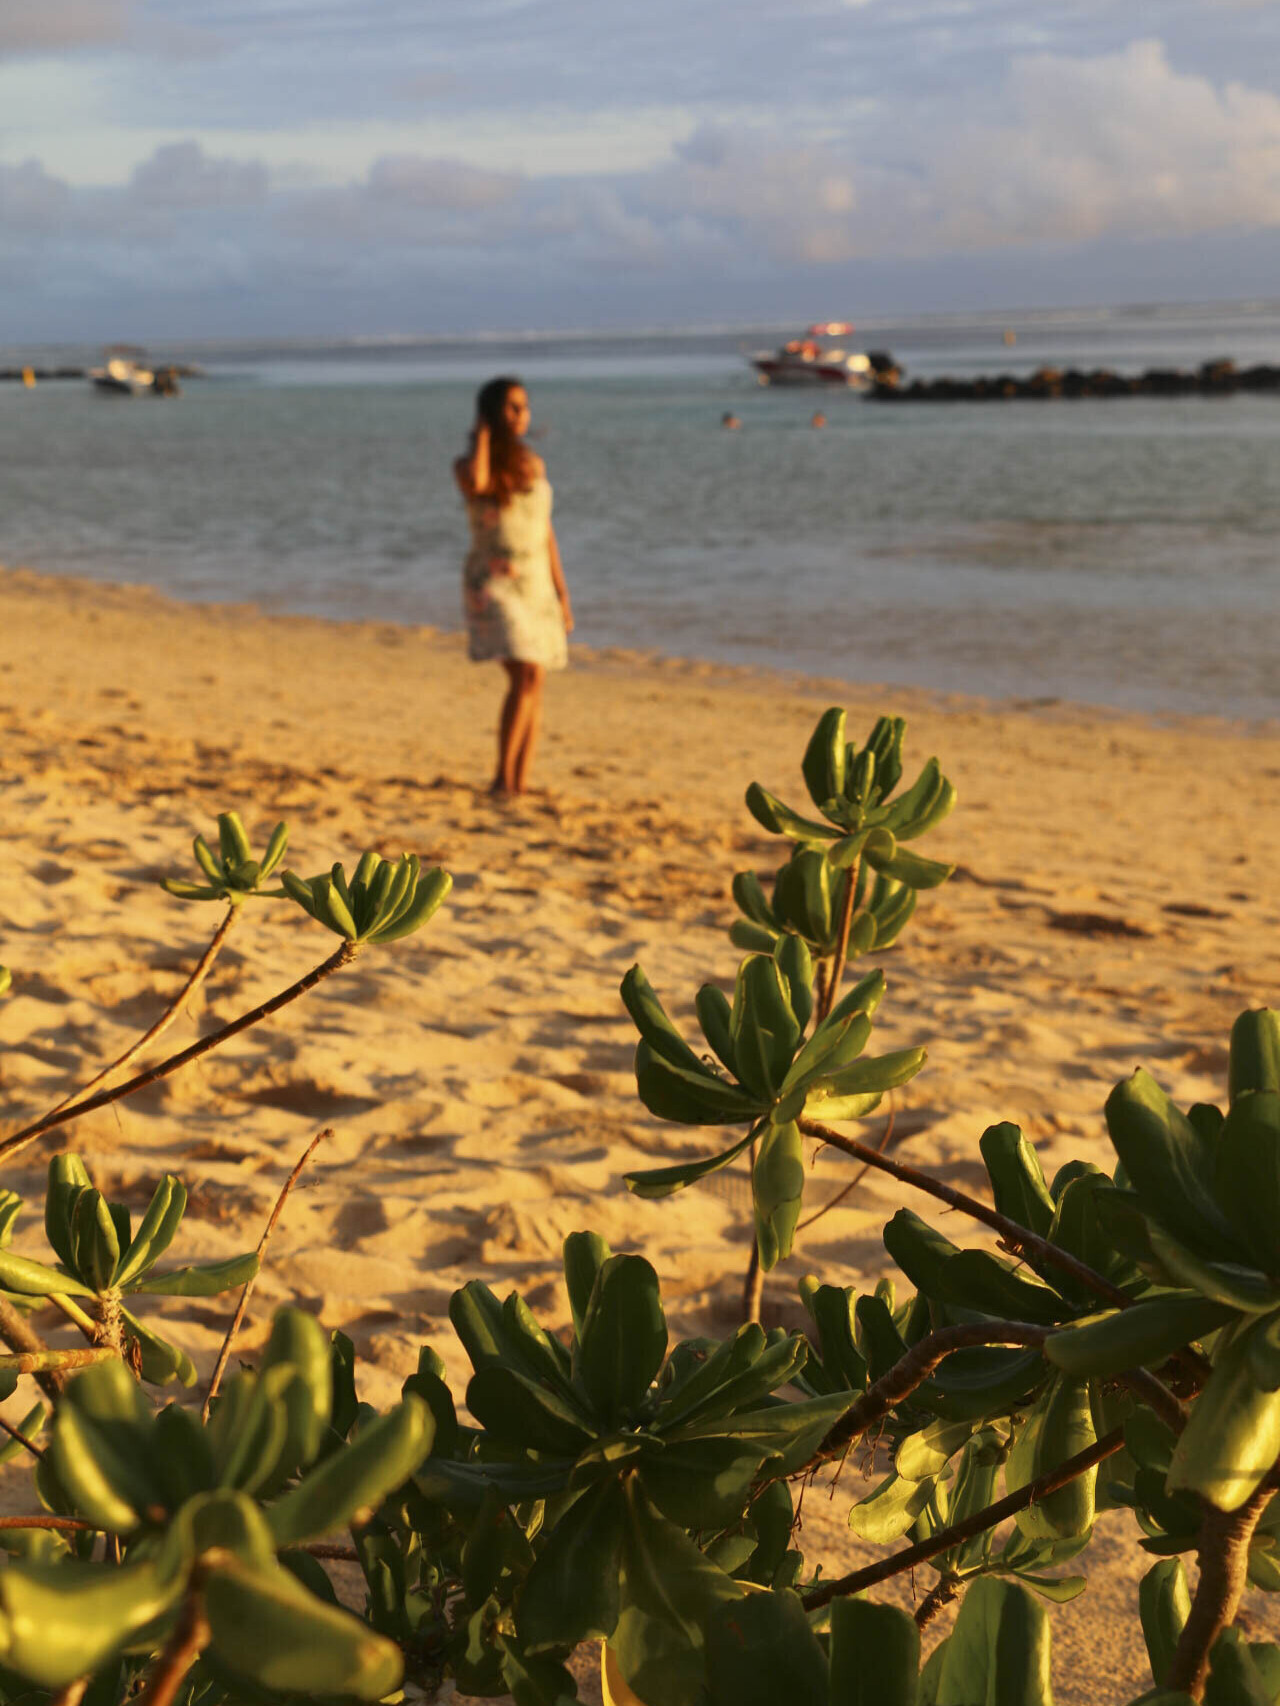 Woman standing on a beach in Mauritius during sunset